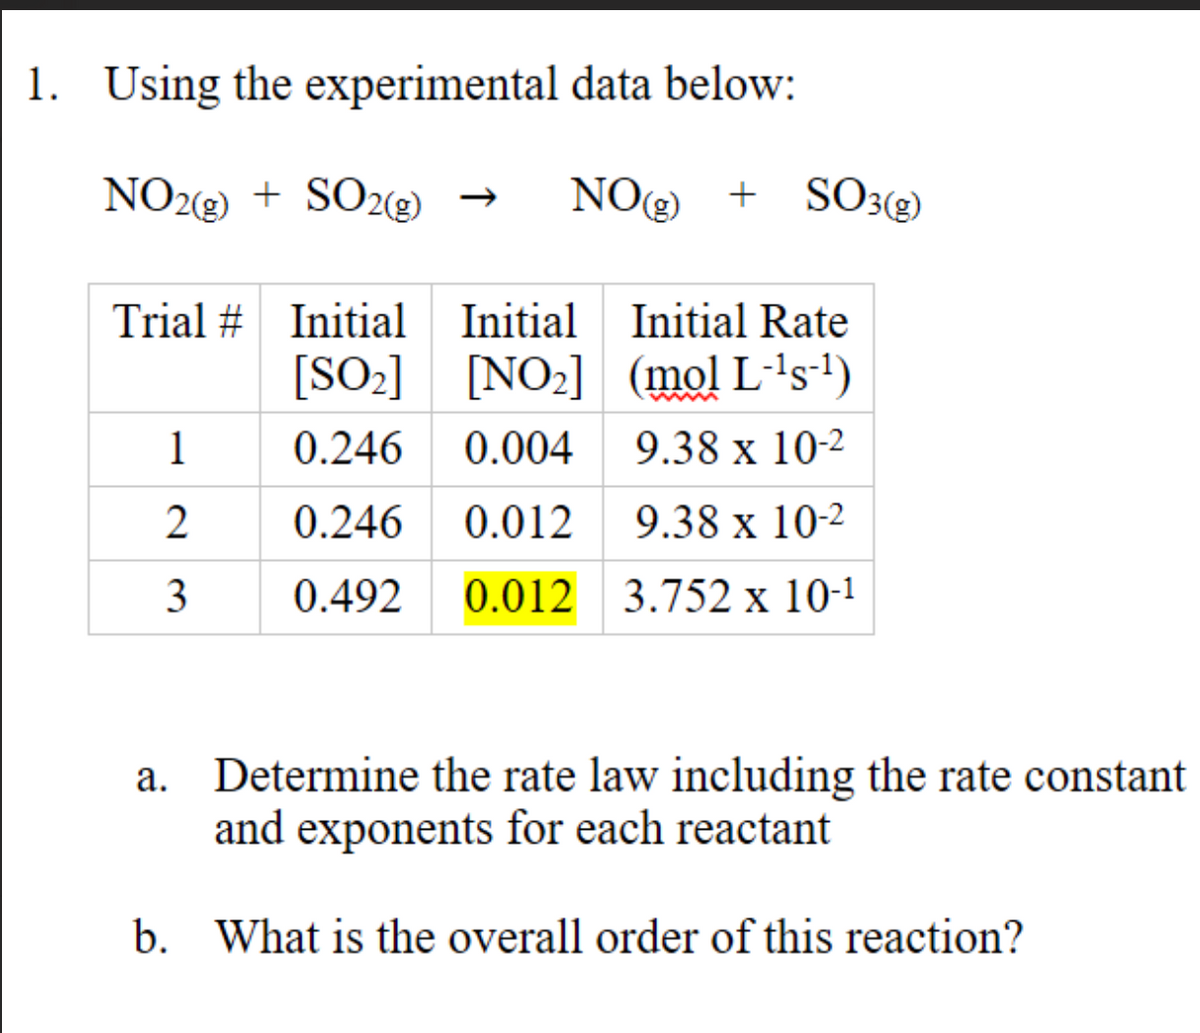 1. Using the experimental data below:
NO2(g) + SO2(g)
NO(g) + SO3(g)
Trial # Initial Initial
Initial Rate
[SO₂]
[NO₂]
[NO₂] (mol L-¹s-¹)
0.246 0.004
9.38 x 10-2
0.246 0.012
9.38 x 10-2
0.492 0.012 3.752 x 10-¹
1
2
3
Determine the rate law including the rate constant
and exponents for each reactant
b. What is the overall order of this reaction?